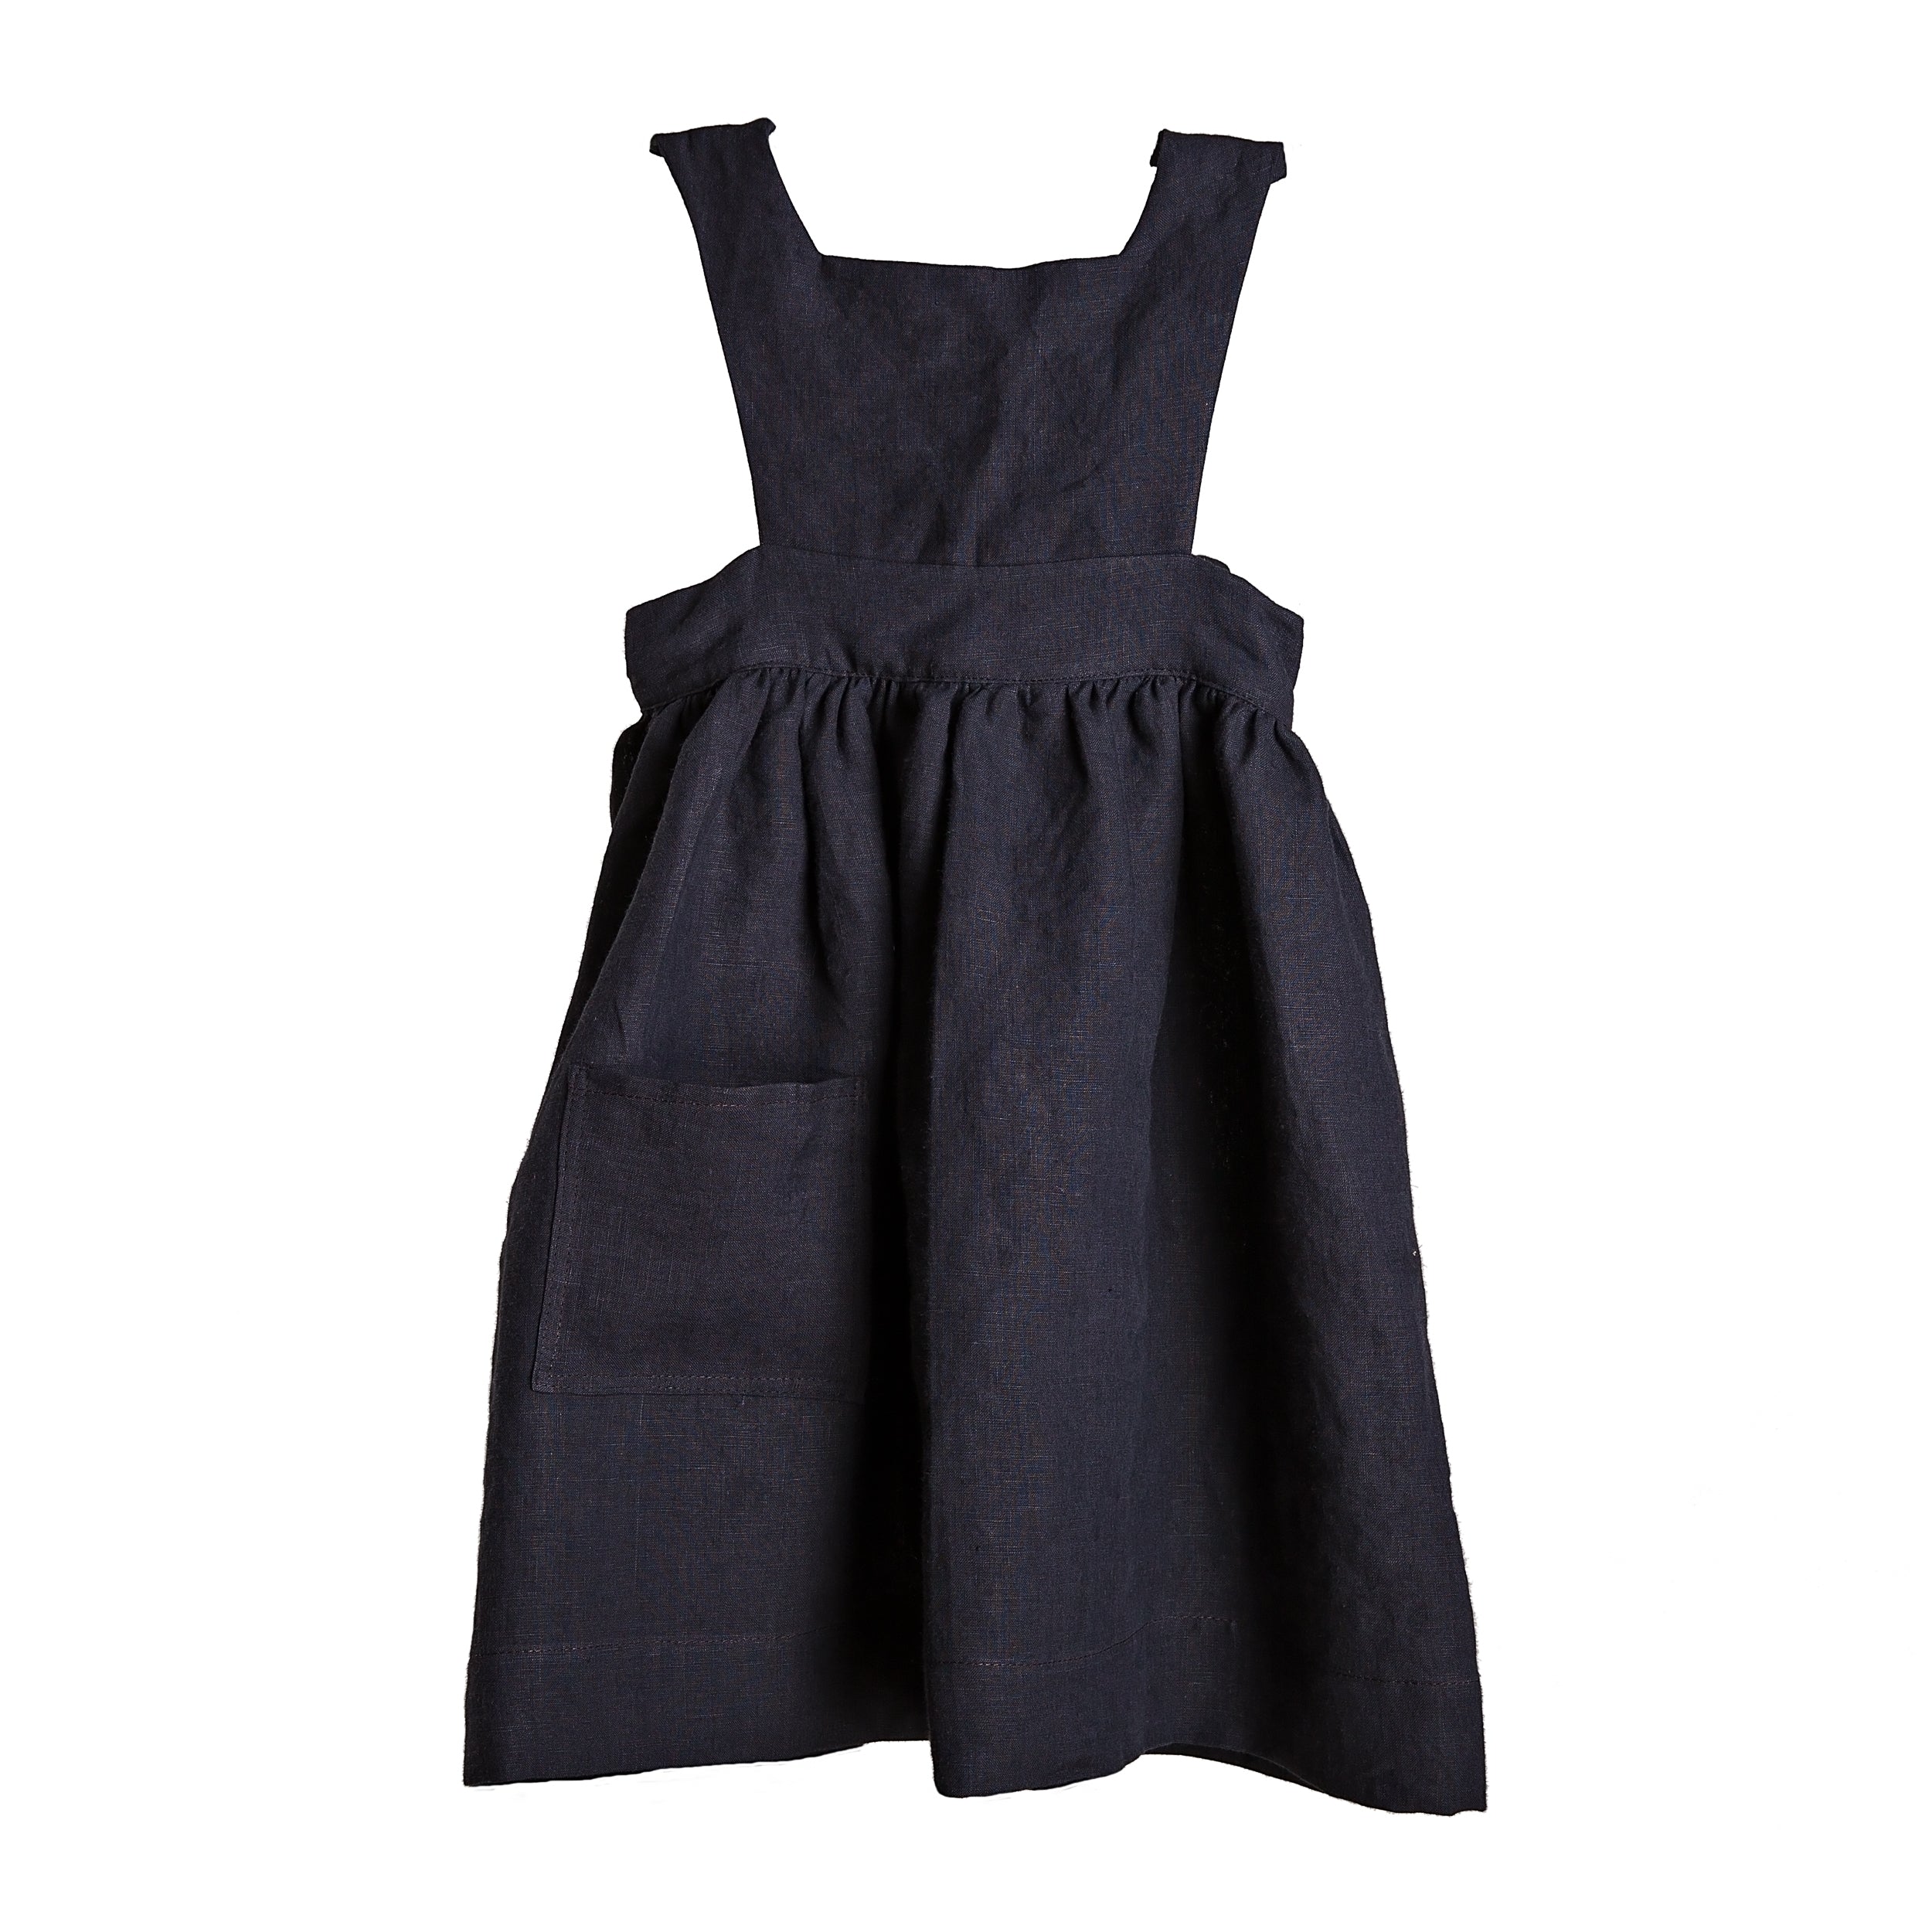 Carrier Company Child's Pinafore in Navy Linen